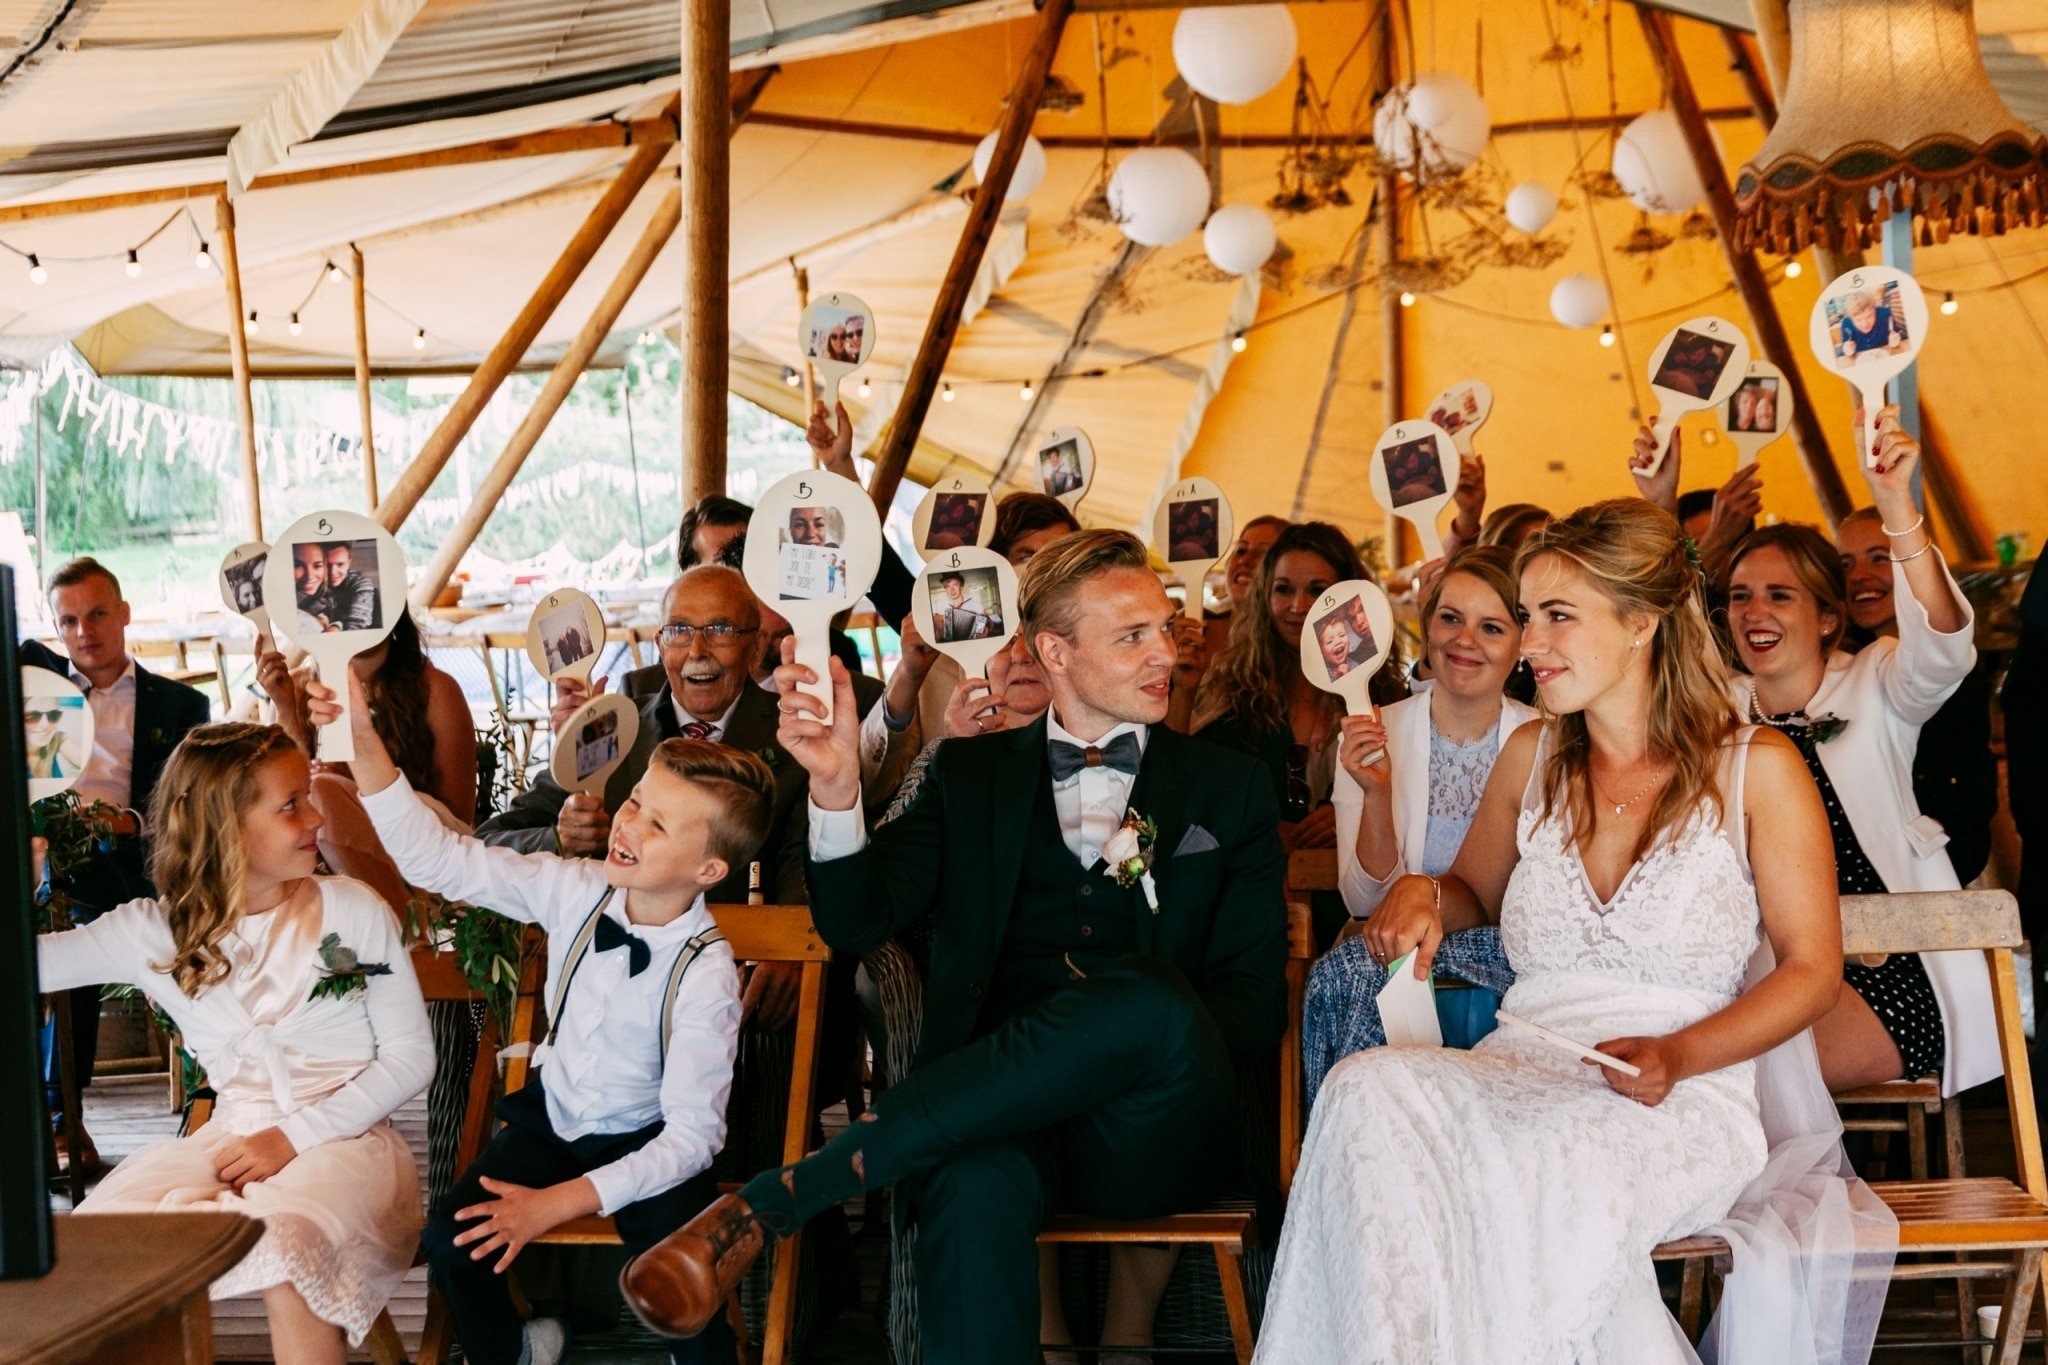 A wedding ceremony in a tepee tent.